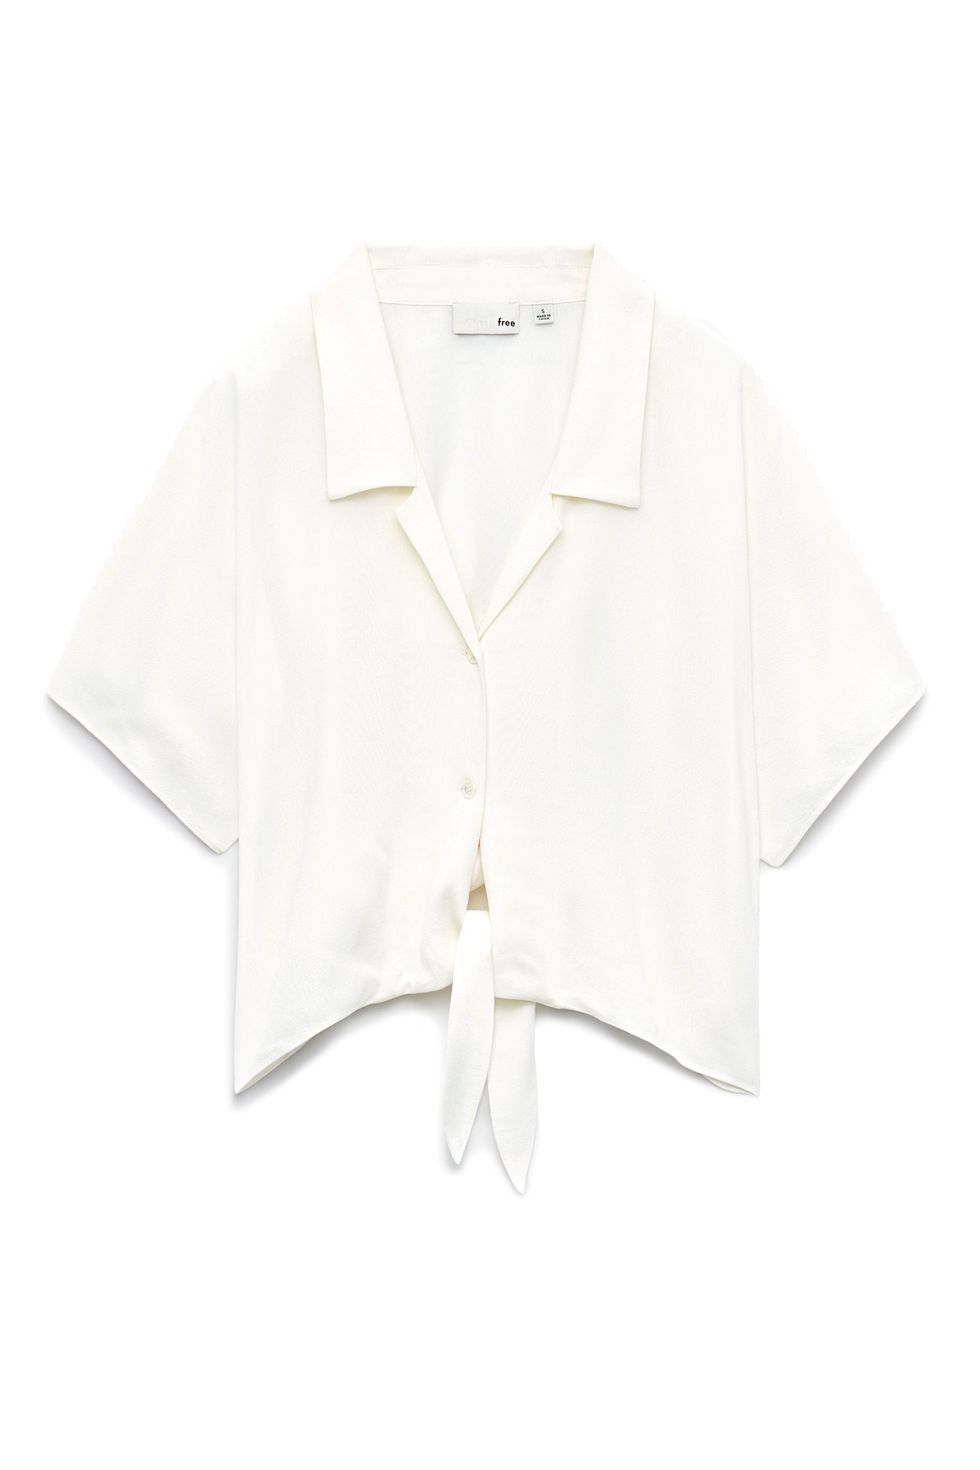 <p>
Wilfred Huang Blouse, $65; <a href="http://www.aritzia.com/en/product/huang-blouse/63074.html?dwvar_63074_color=6824">aritzia.com</a></p><p><span class="redactor-invisible-space" data-verified="redactor" data-redactor-tag="span" data-redactor-class="redactor-invisible-space"></span></p>